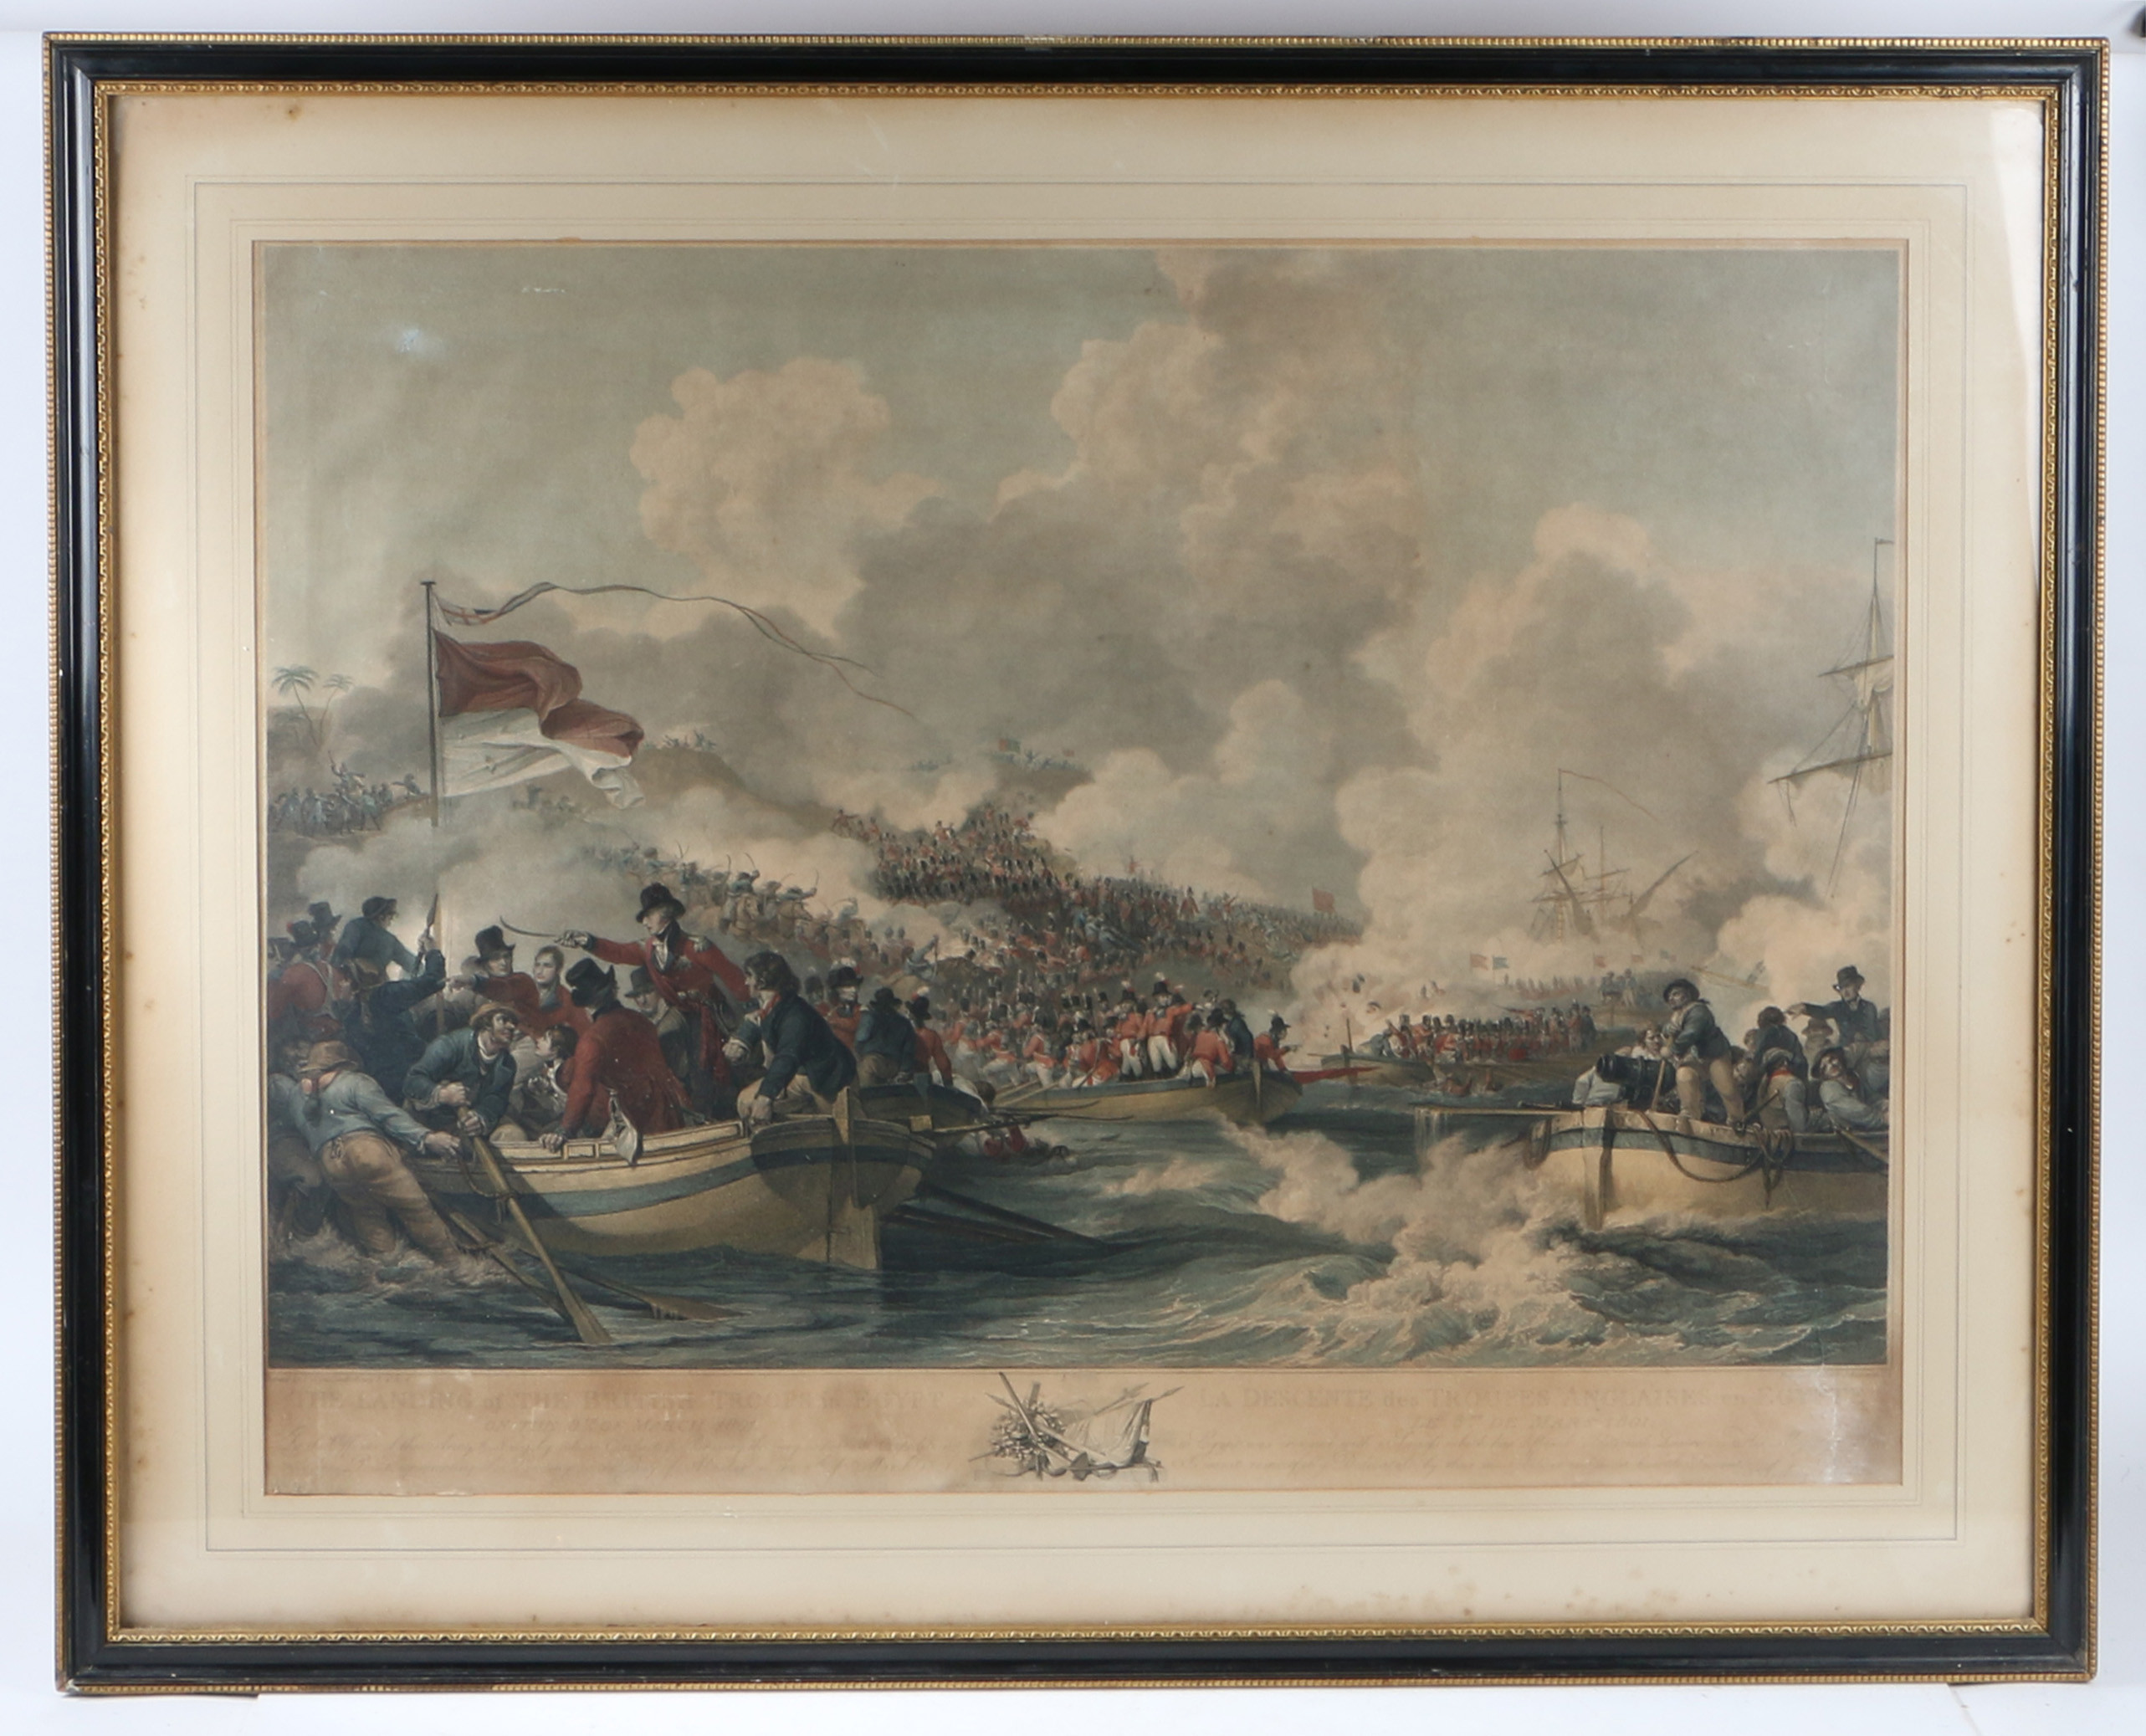 PHILLIP JAMES DE LOUTHERBOURG (1740-1812) "THE LANDING OF THE BRITISH TROOPS IN EGYPT ON THE 8TH MAR